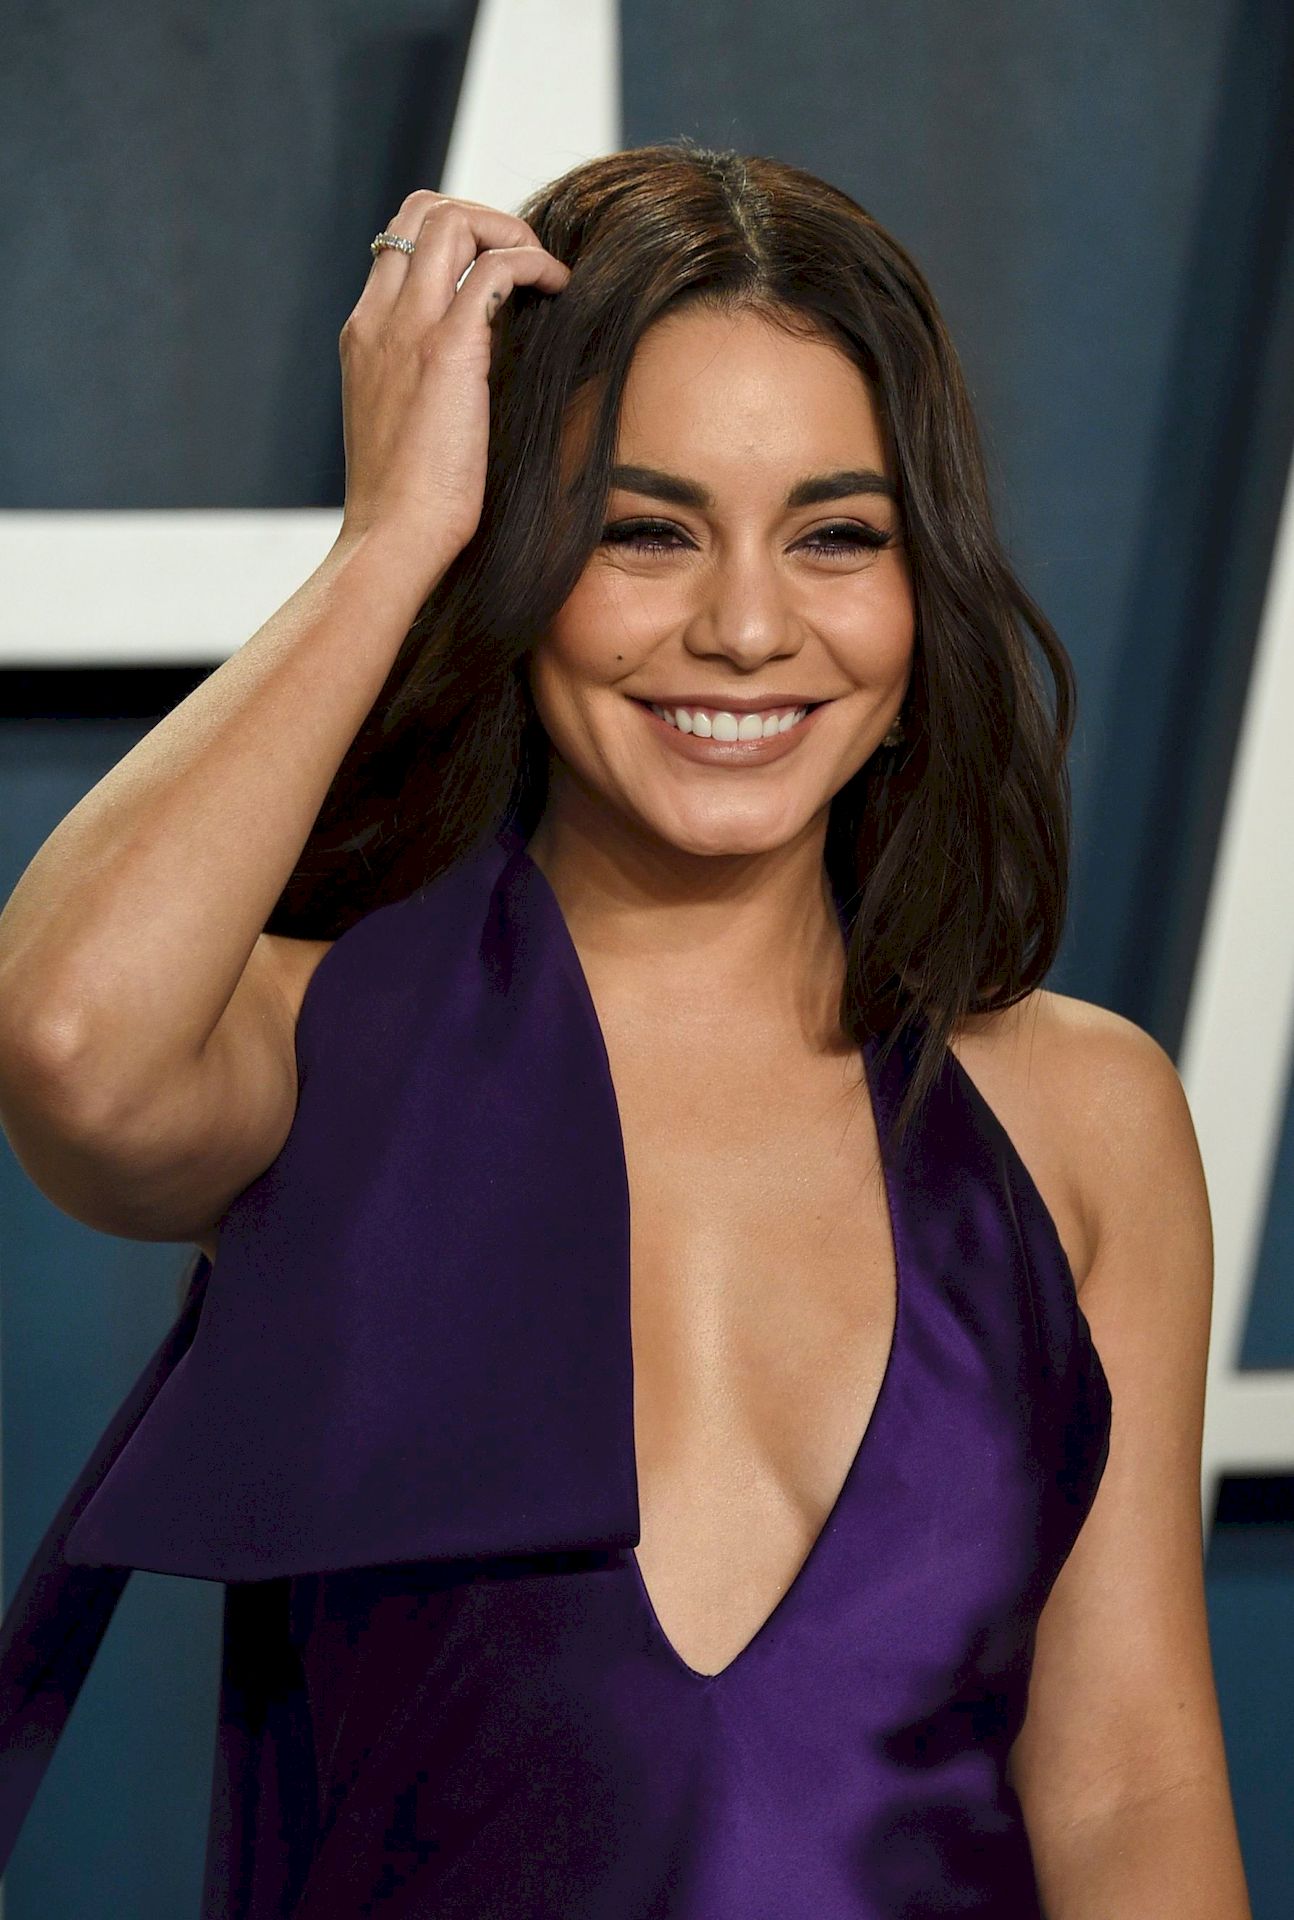 Vanessa Hudgens Looks Sexy In A Purple Dress At The Vanity Fair Oscar Party 0017